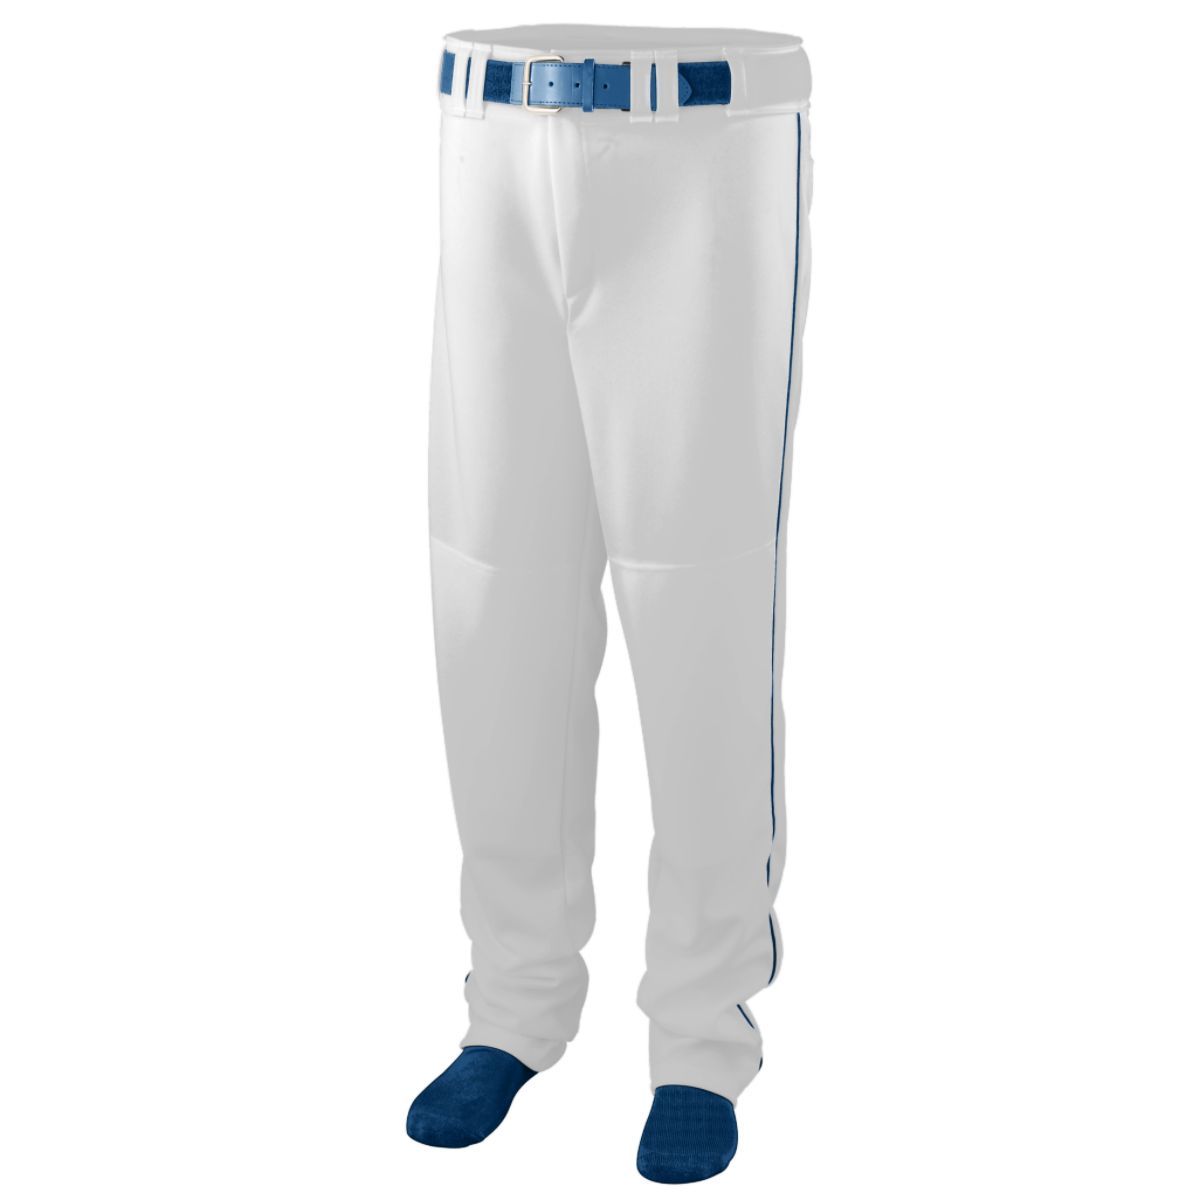 Augusta Sportswear Series Baseball/Softball Pant With Piping in White/Navy  -Part of the Adult, Adult-Pants, Pants, Augusta-Products, Baseball, All-Sports, All-Sports-1 product lines at KanaleyCreations.com